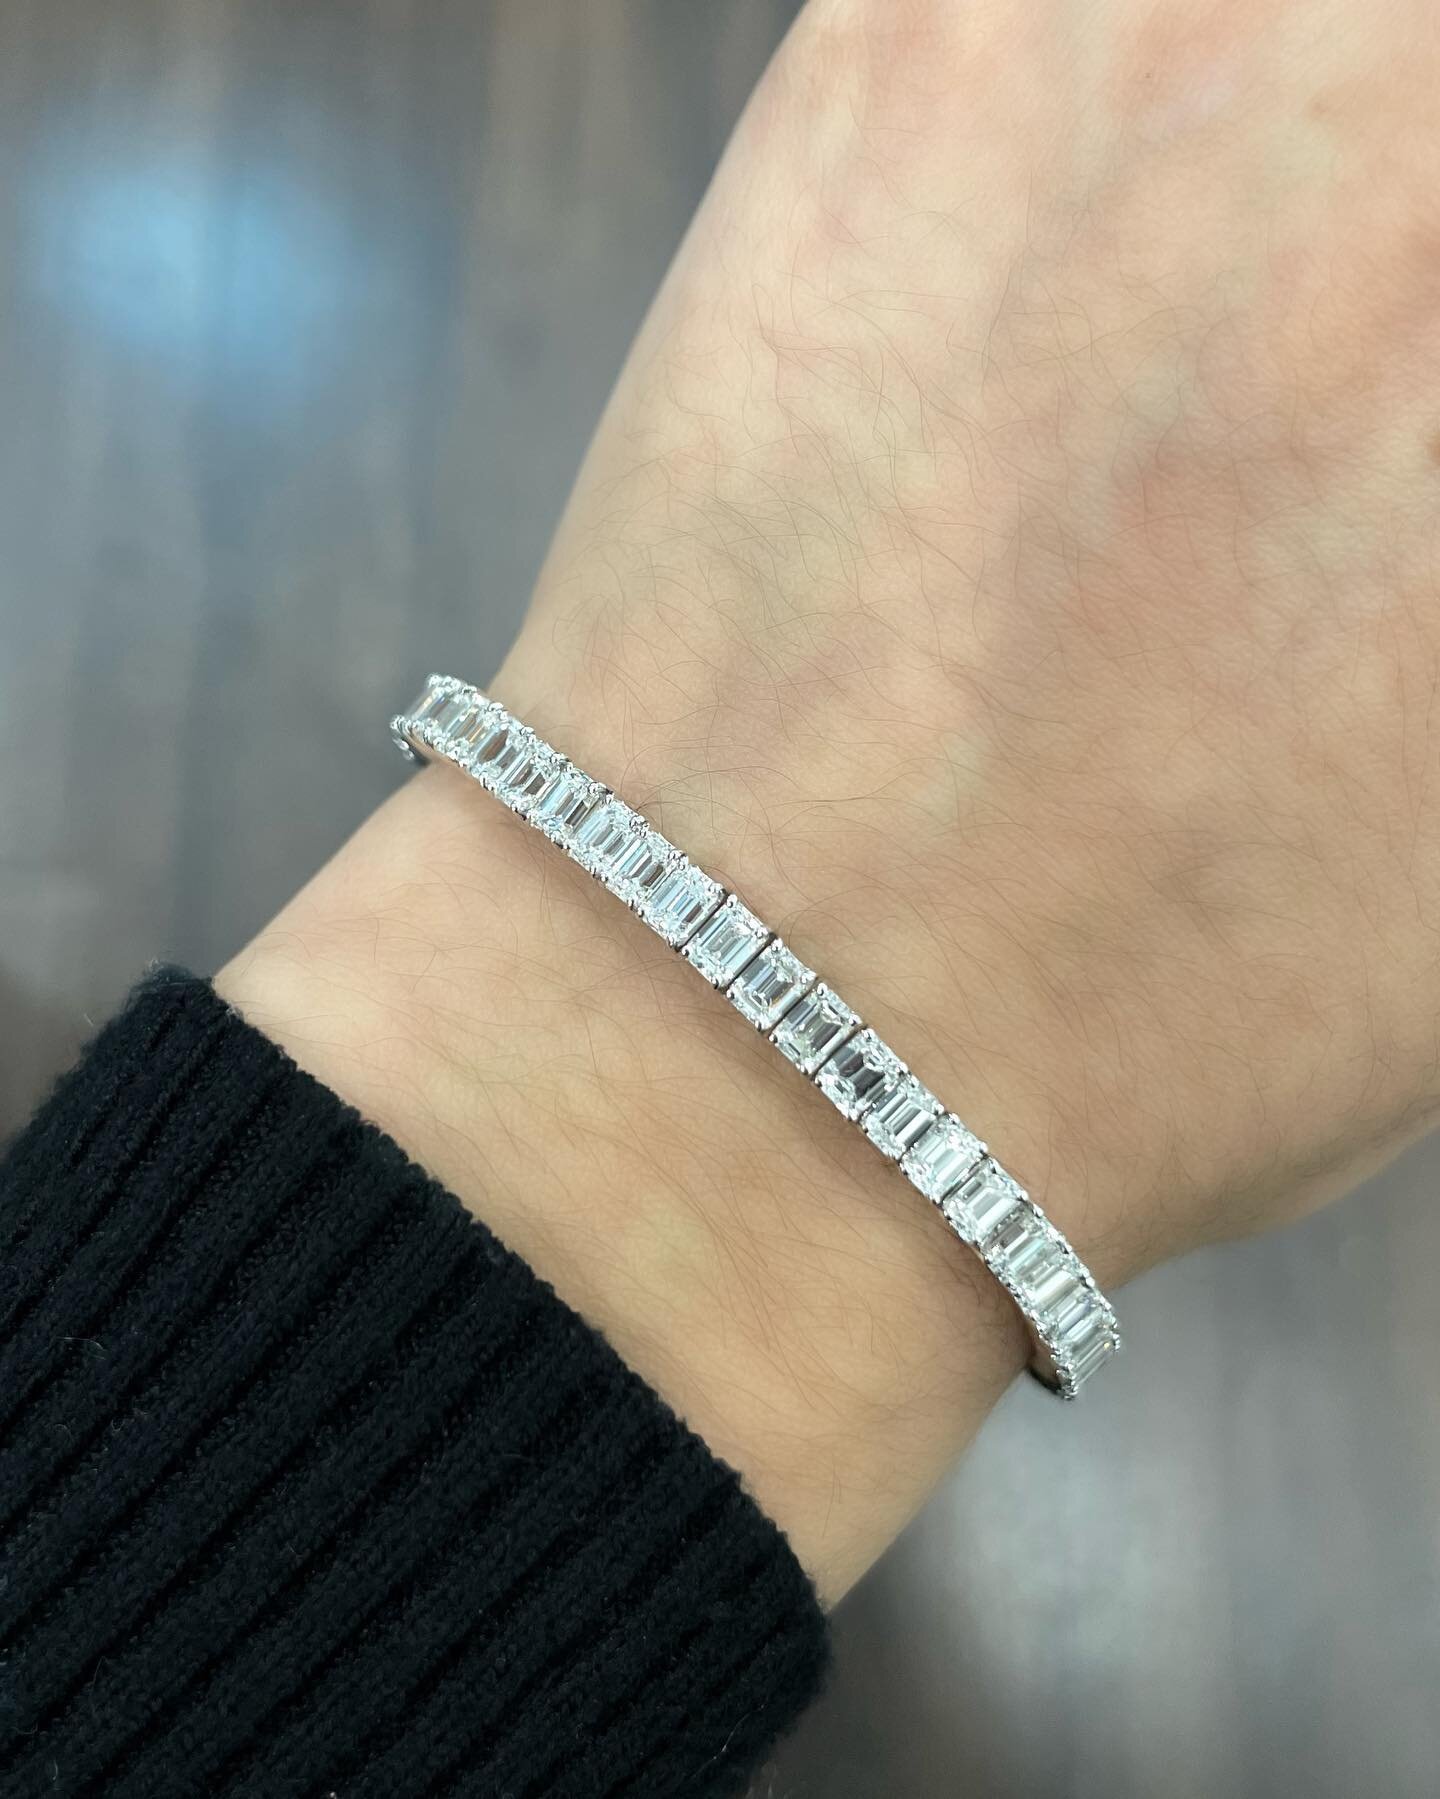 A must have for your jewelry collection! We have bracelets in stock from 2 cts to 20 cts! #tennisbracelet #diamonds #fancy #instajewelry #finejewelry